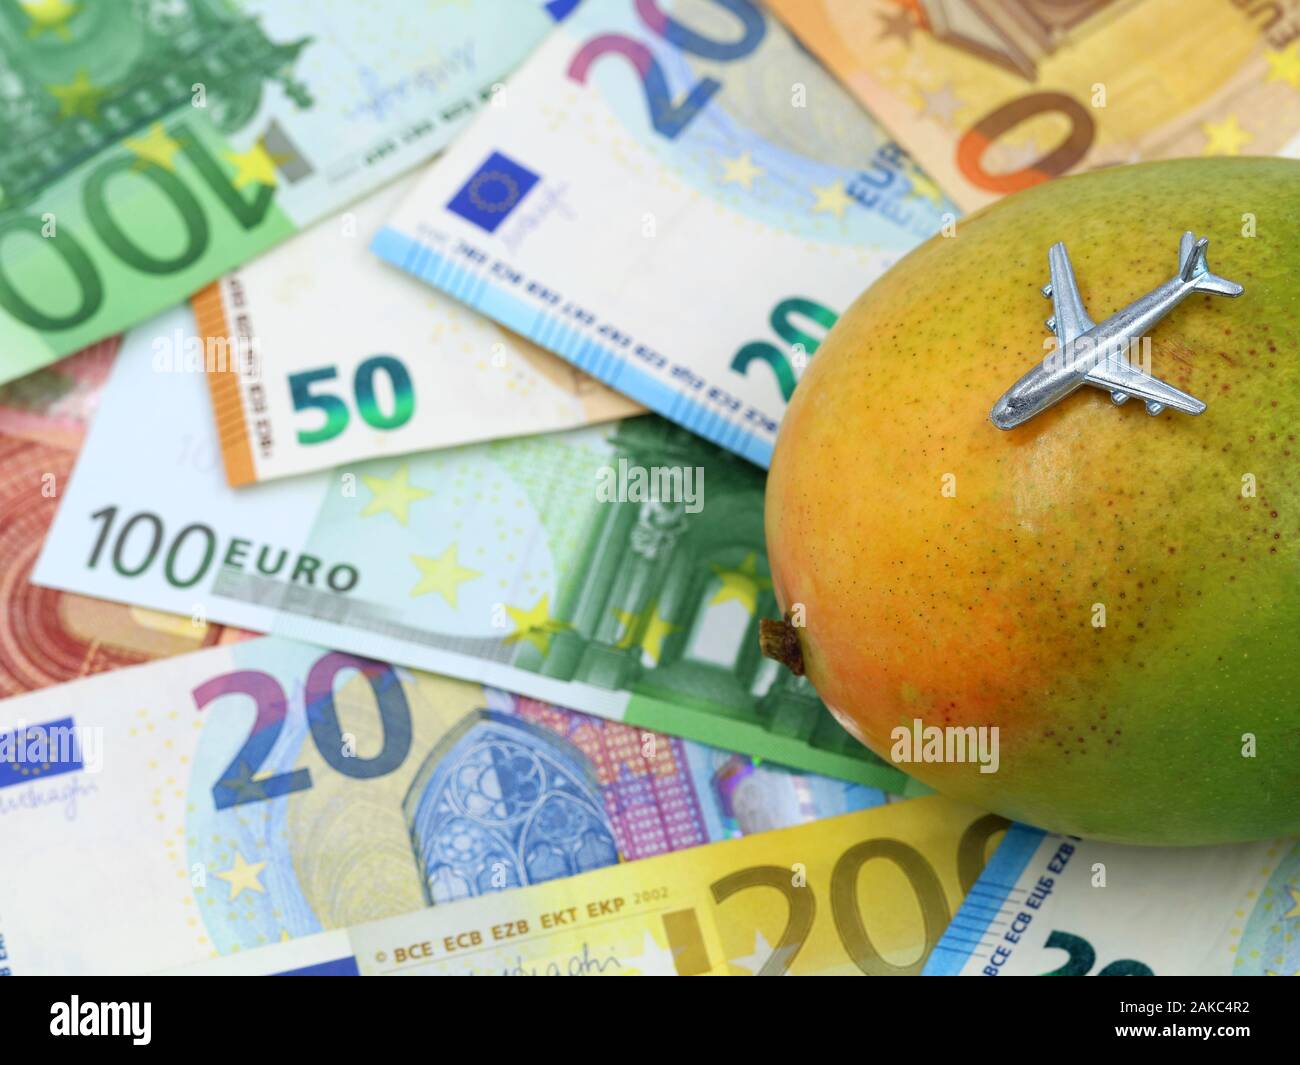 miniature airplane on mango with euro banknotes on background, concept of the costs of exotic fruit import Stock Photo